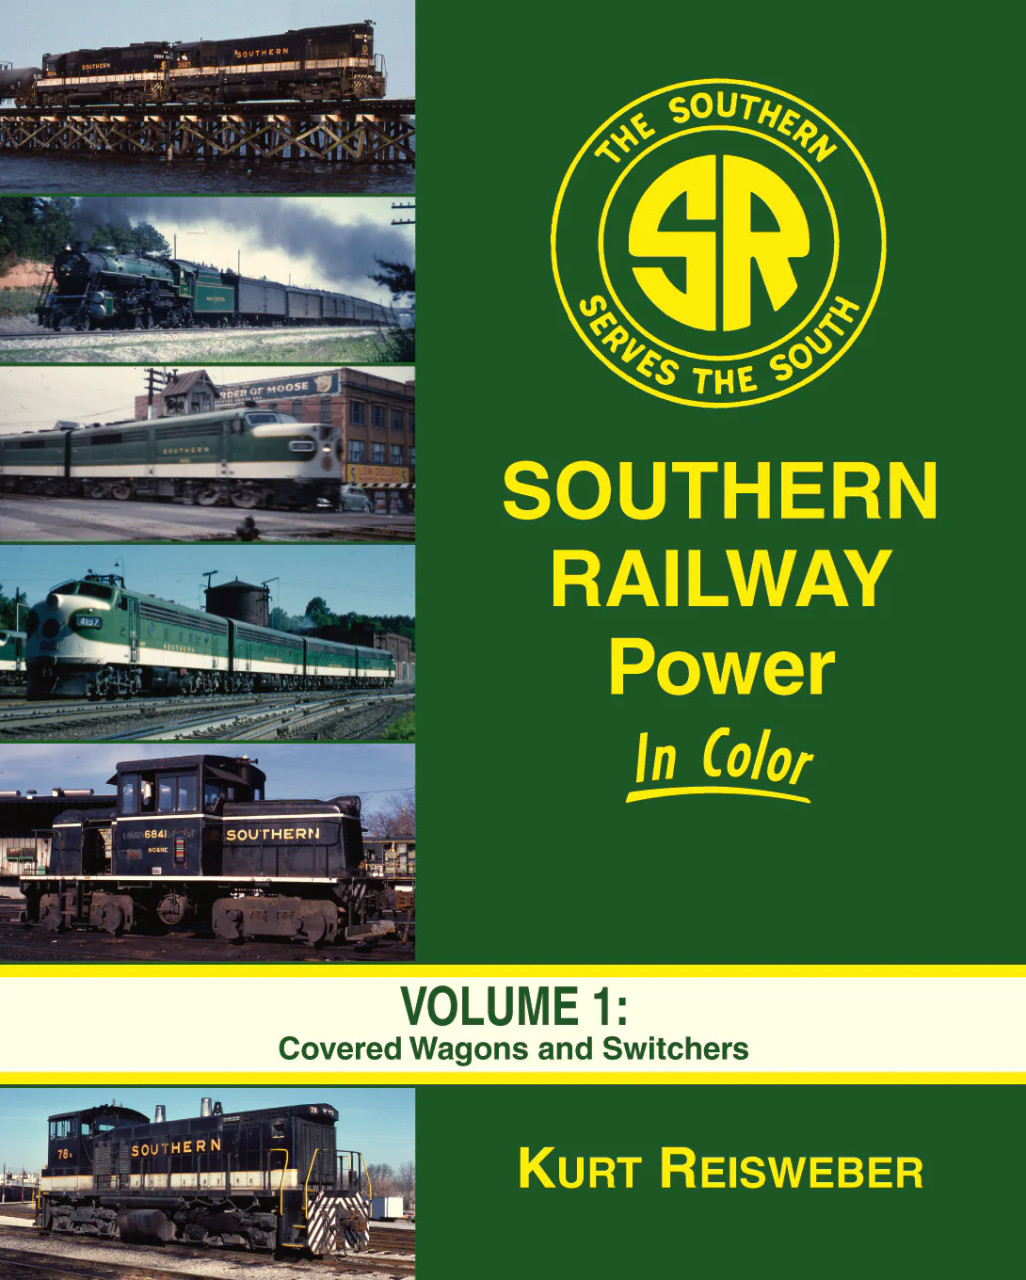 Morning Sun 1563 Southern Railway Power In Color Volume 1: Covered Wagons and Switchers